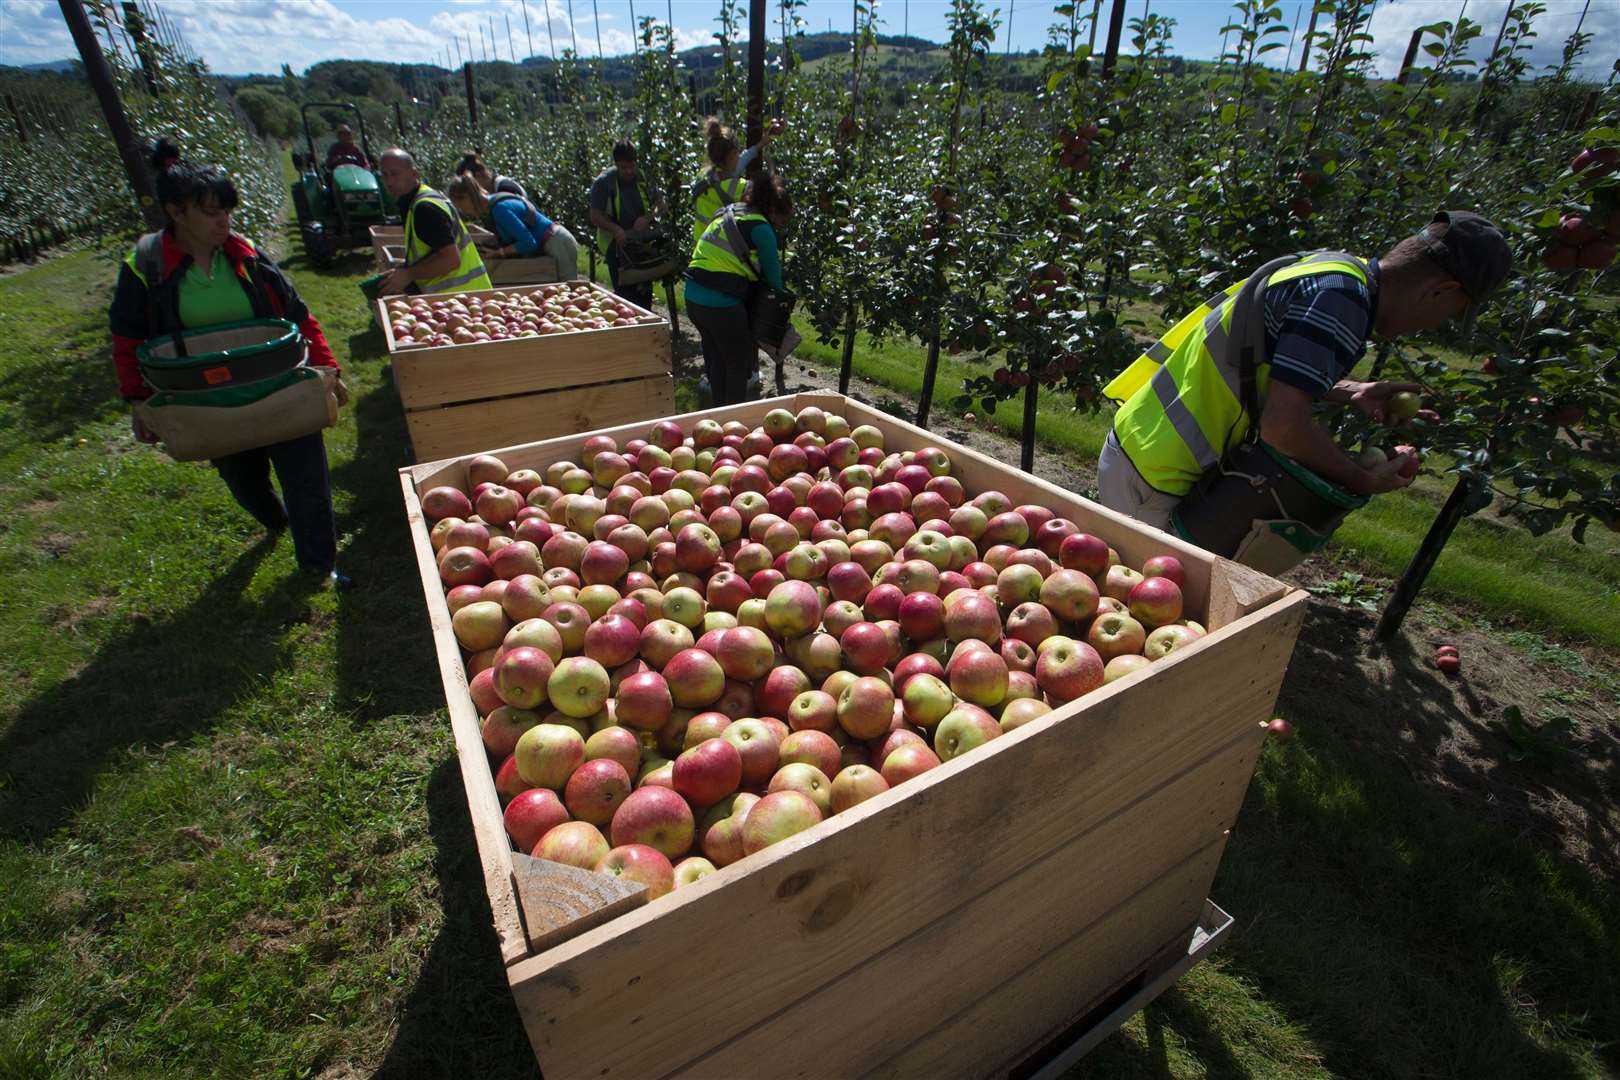 Kent's apple and pear harvest is going to open up the opportunity for hundreds this summer